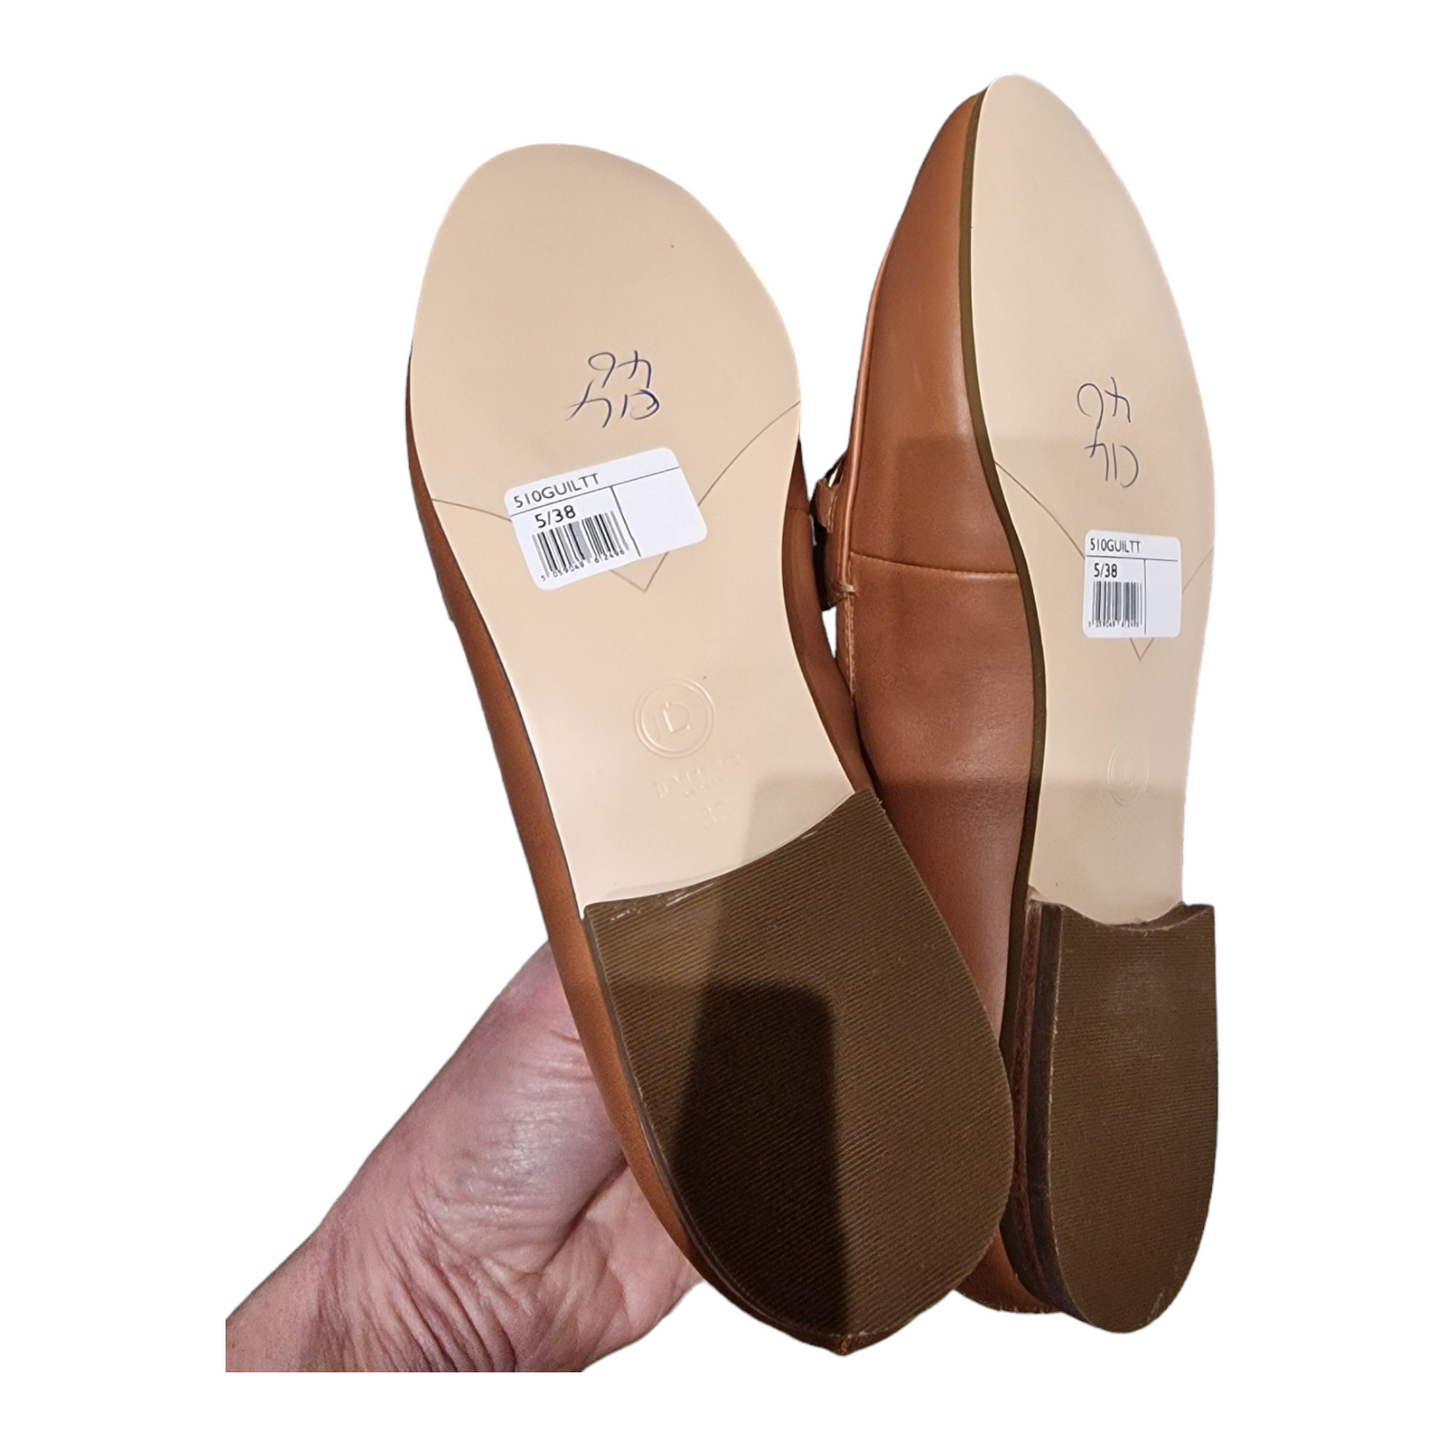 Dune Tan leather loafers, size 5, brand new